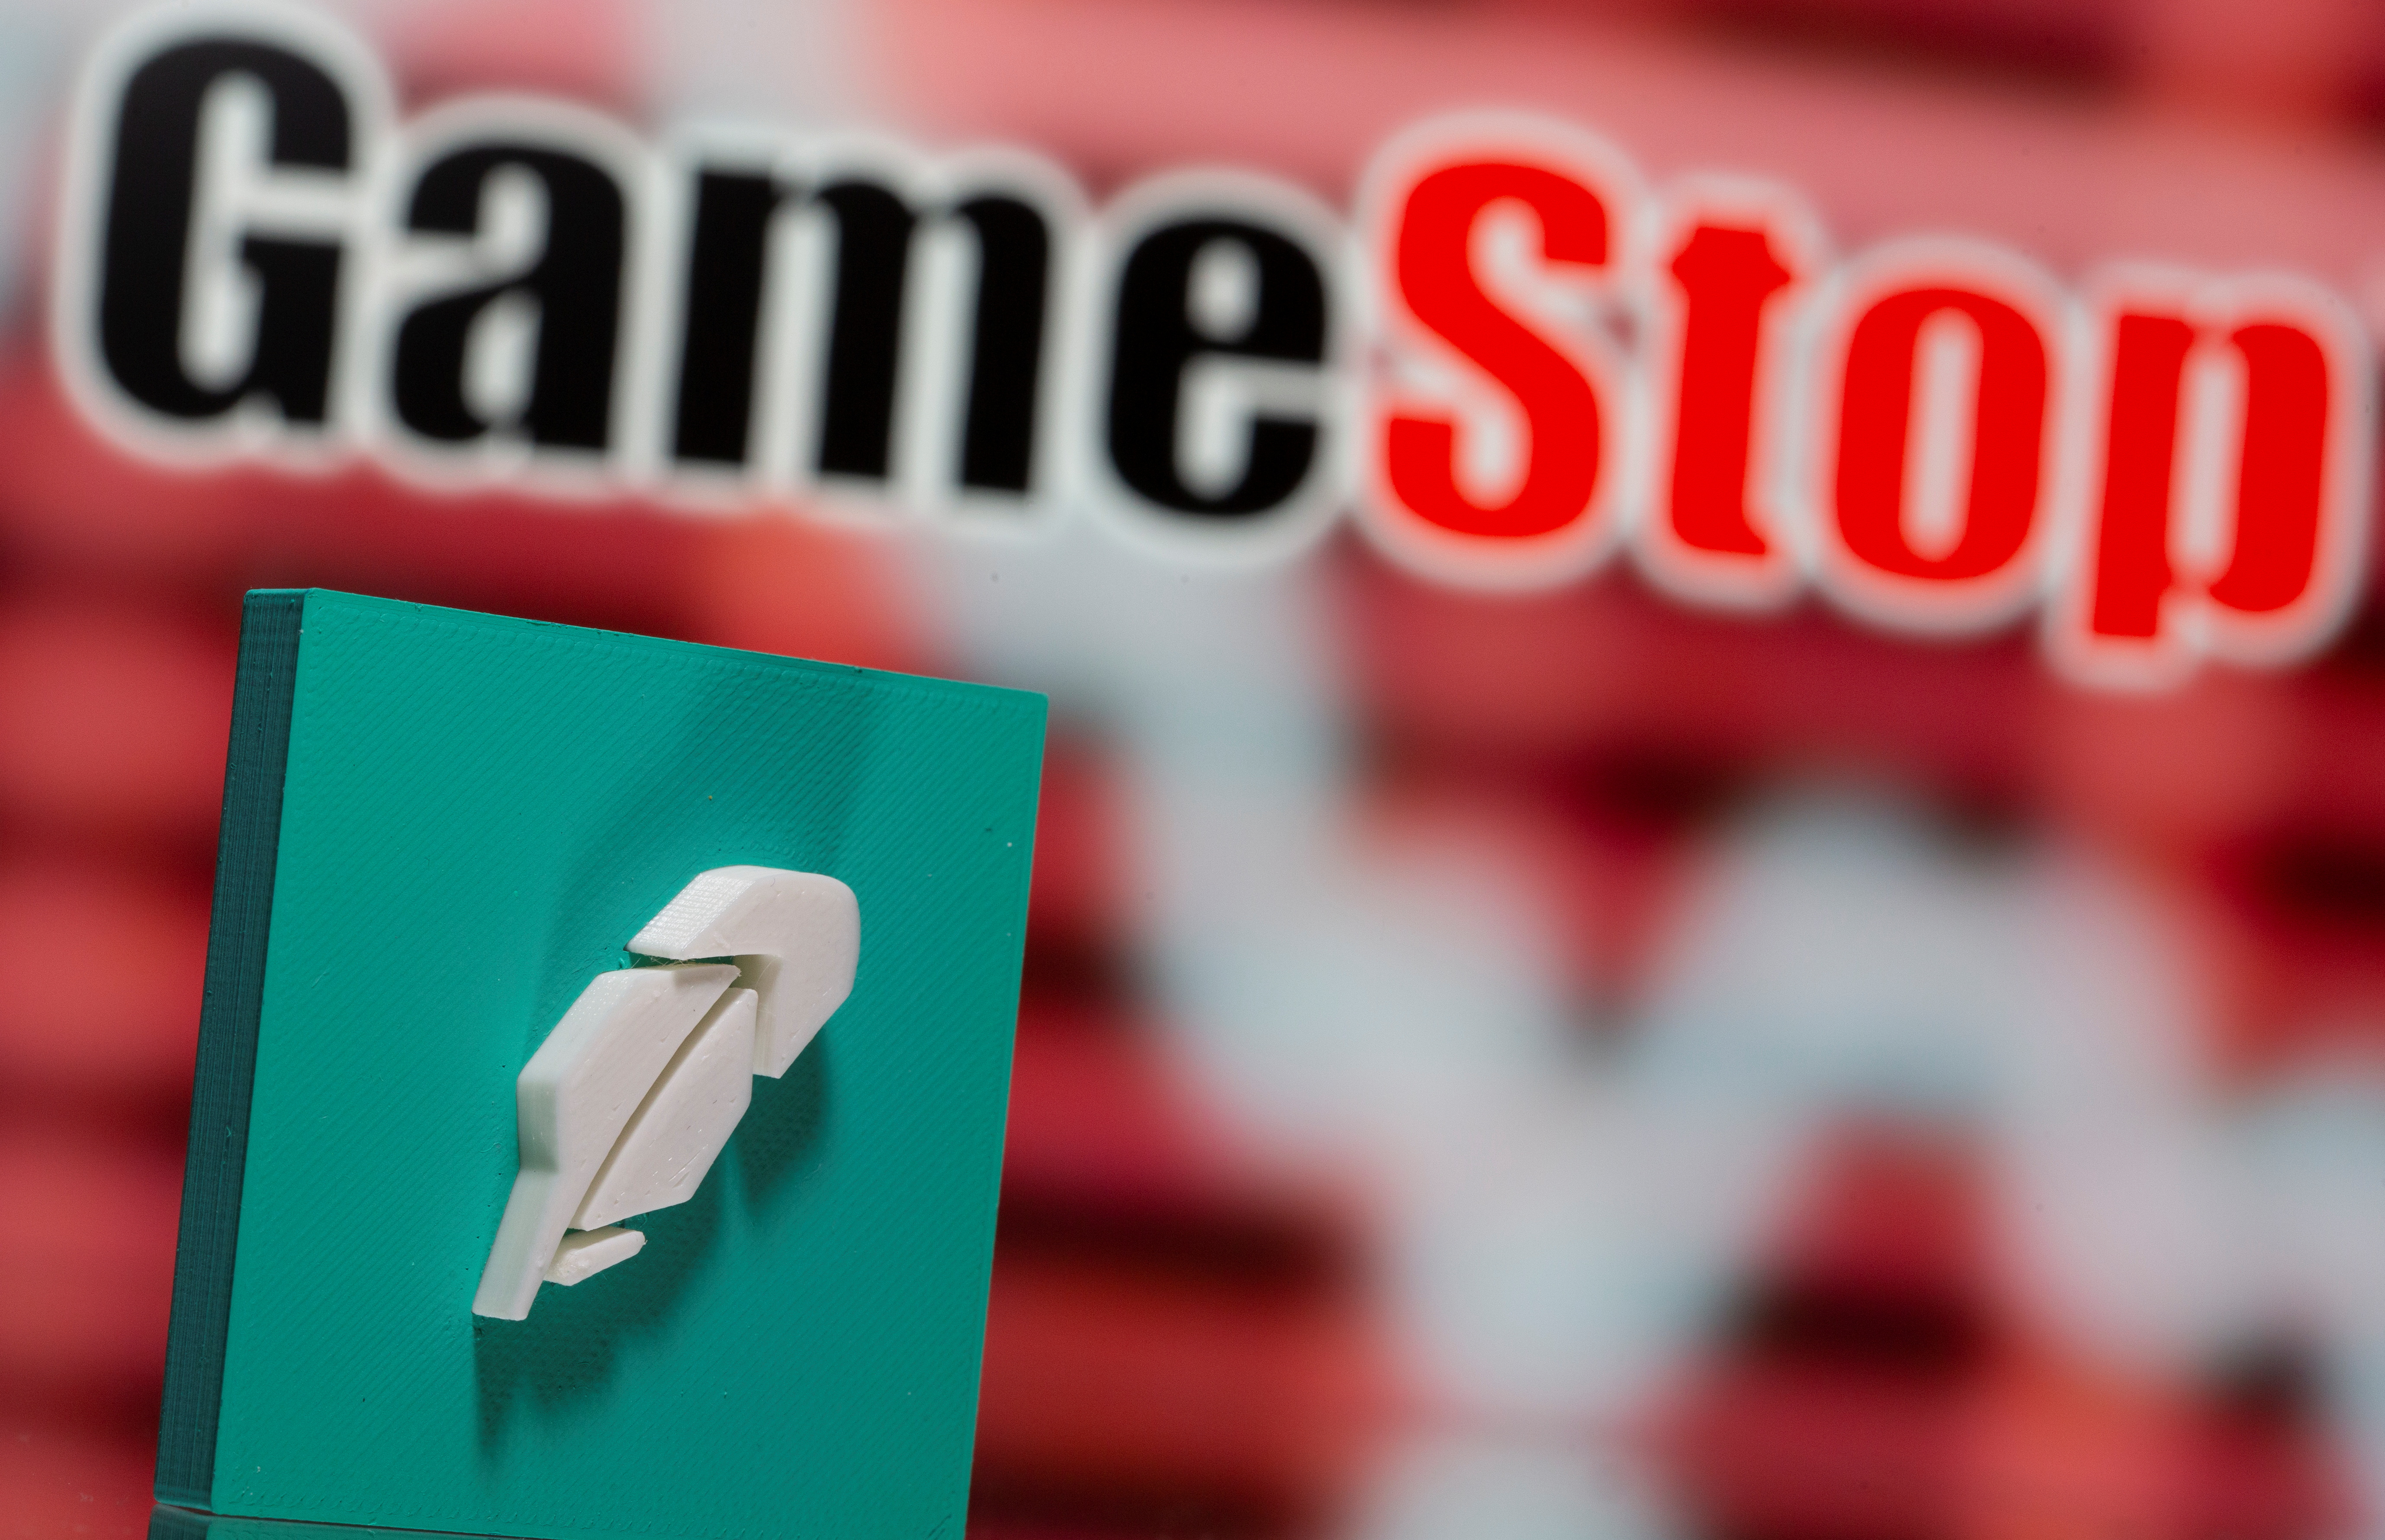 A 3d printed Robinhood logo is seen in front of displayed GameStop logo in this illustration